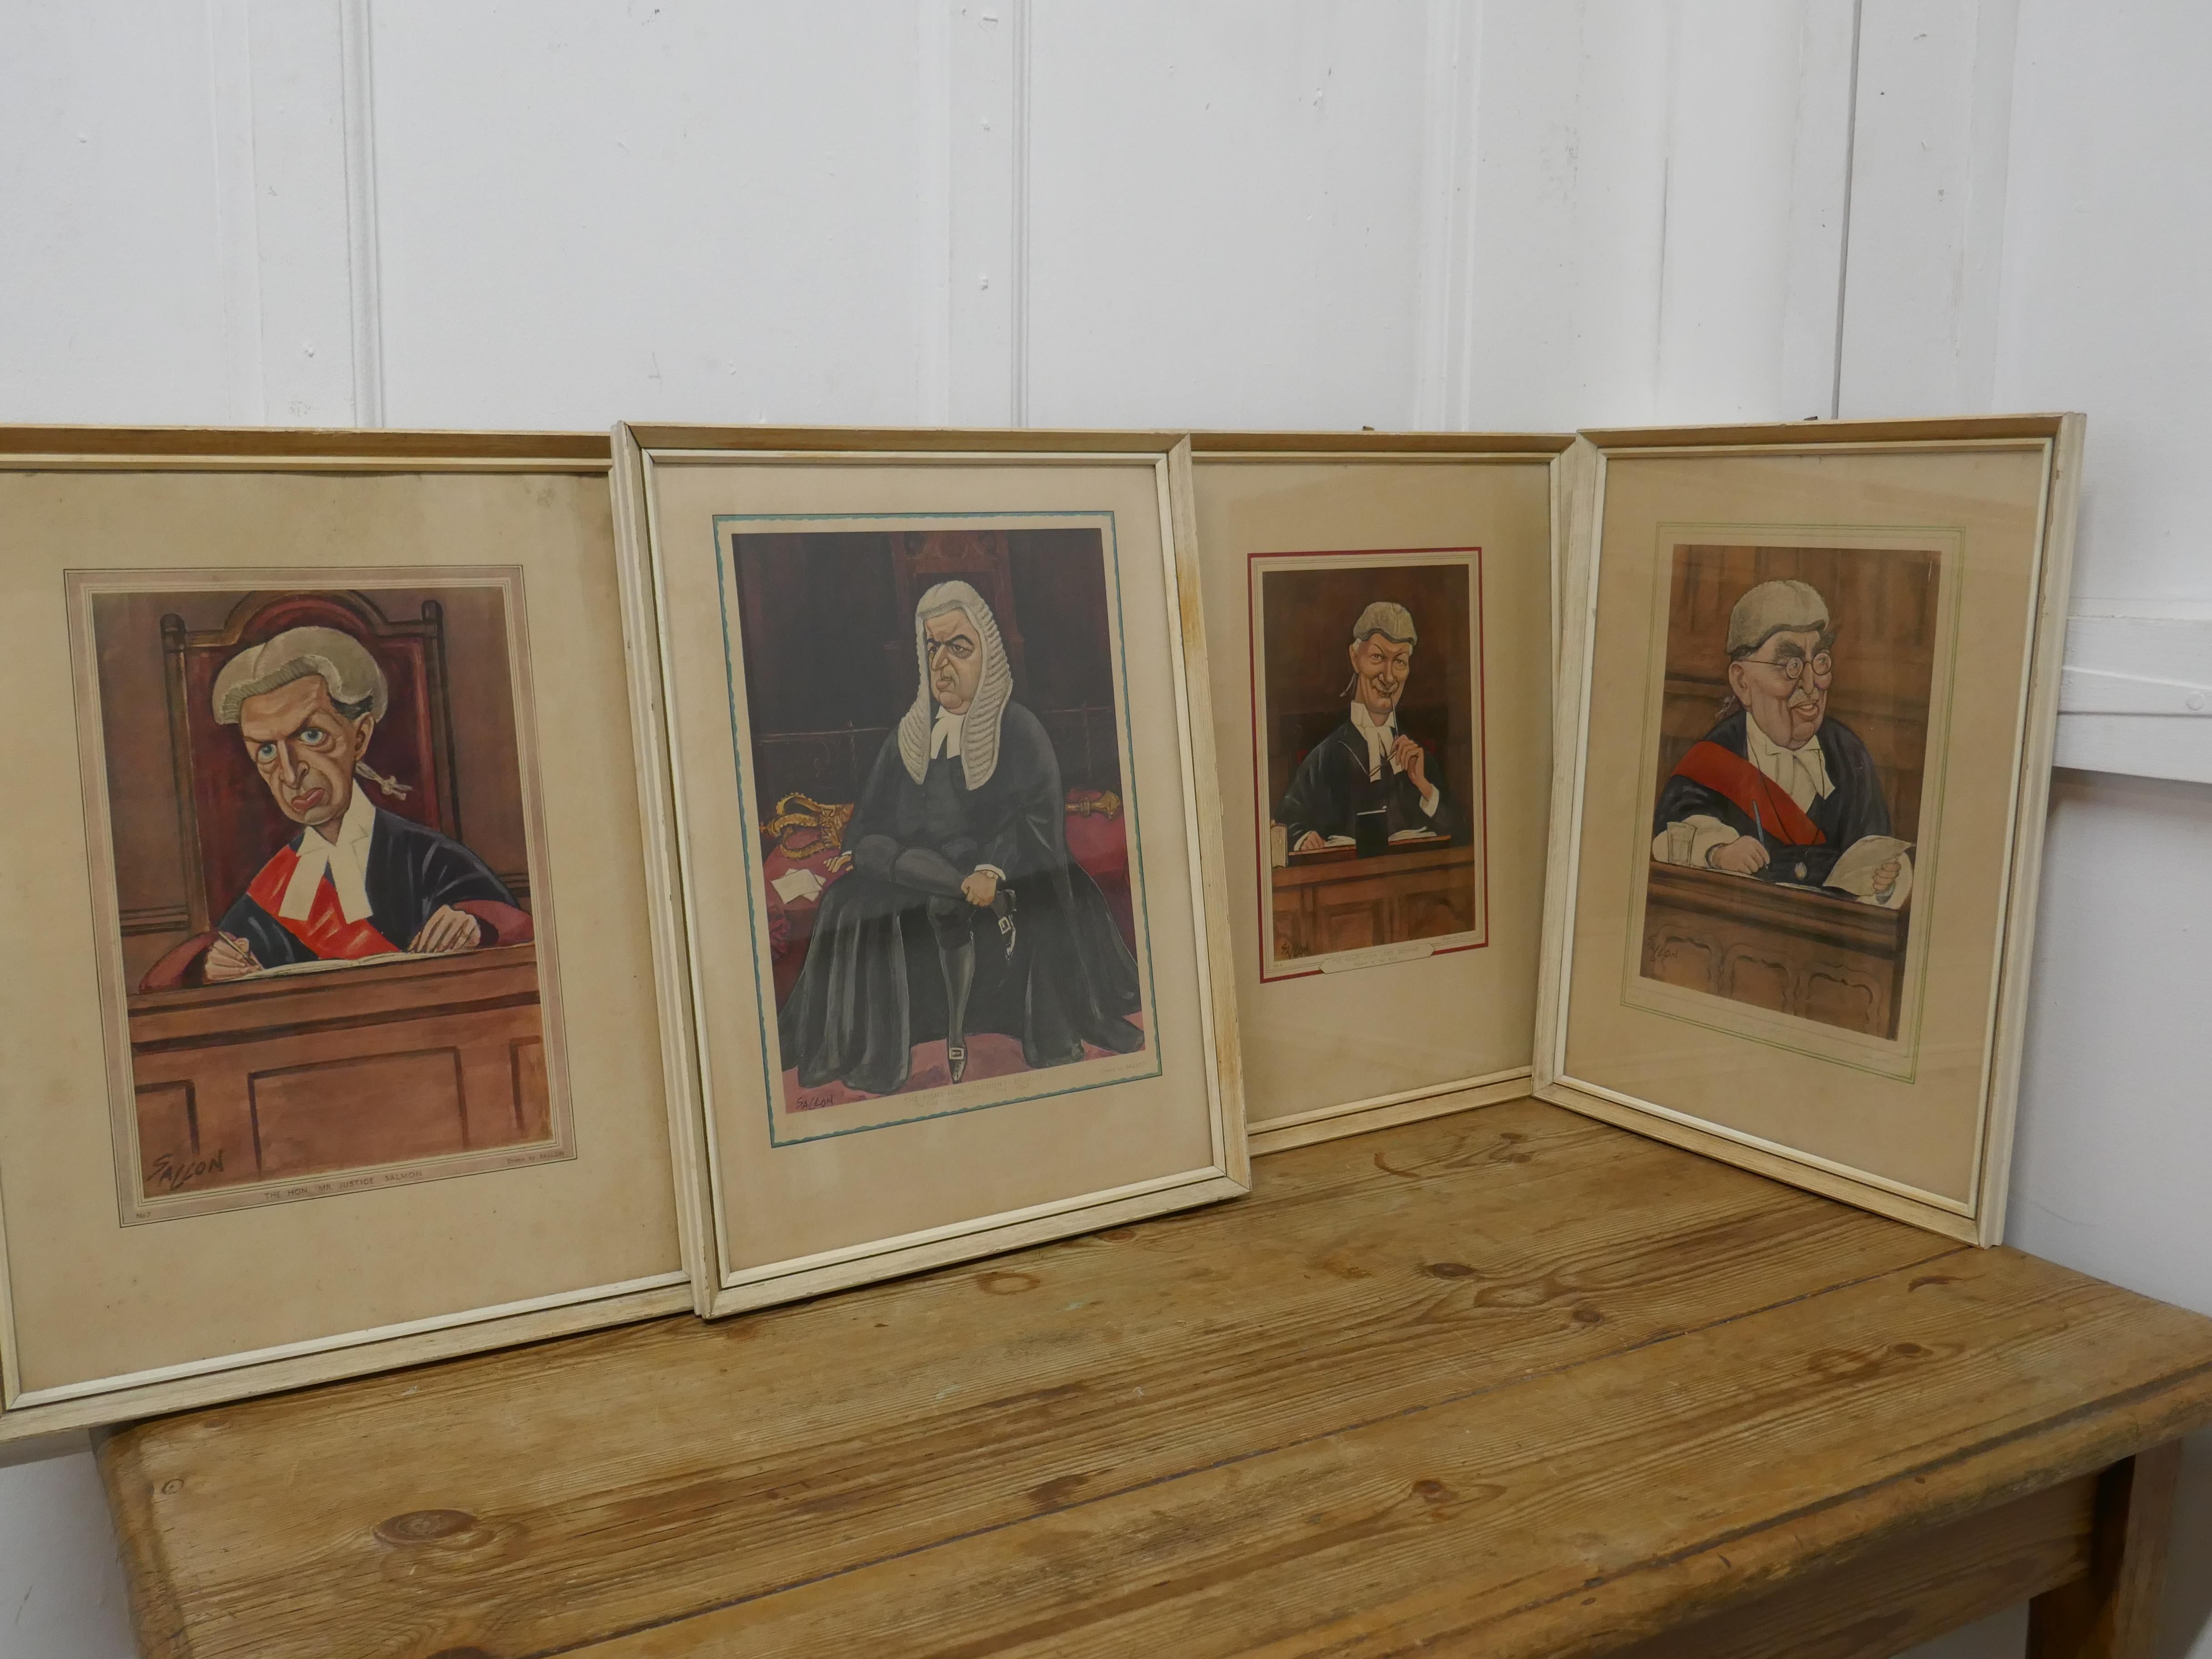 4 original caricature prints of Honourable Justices of Great Britain by Sallon

Charming collection of novelty character prints by Sallon, with each character depicted red and in color
They are
No 3 “The Right Hon Viscount Kilmuir”
No 7 “The